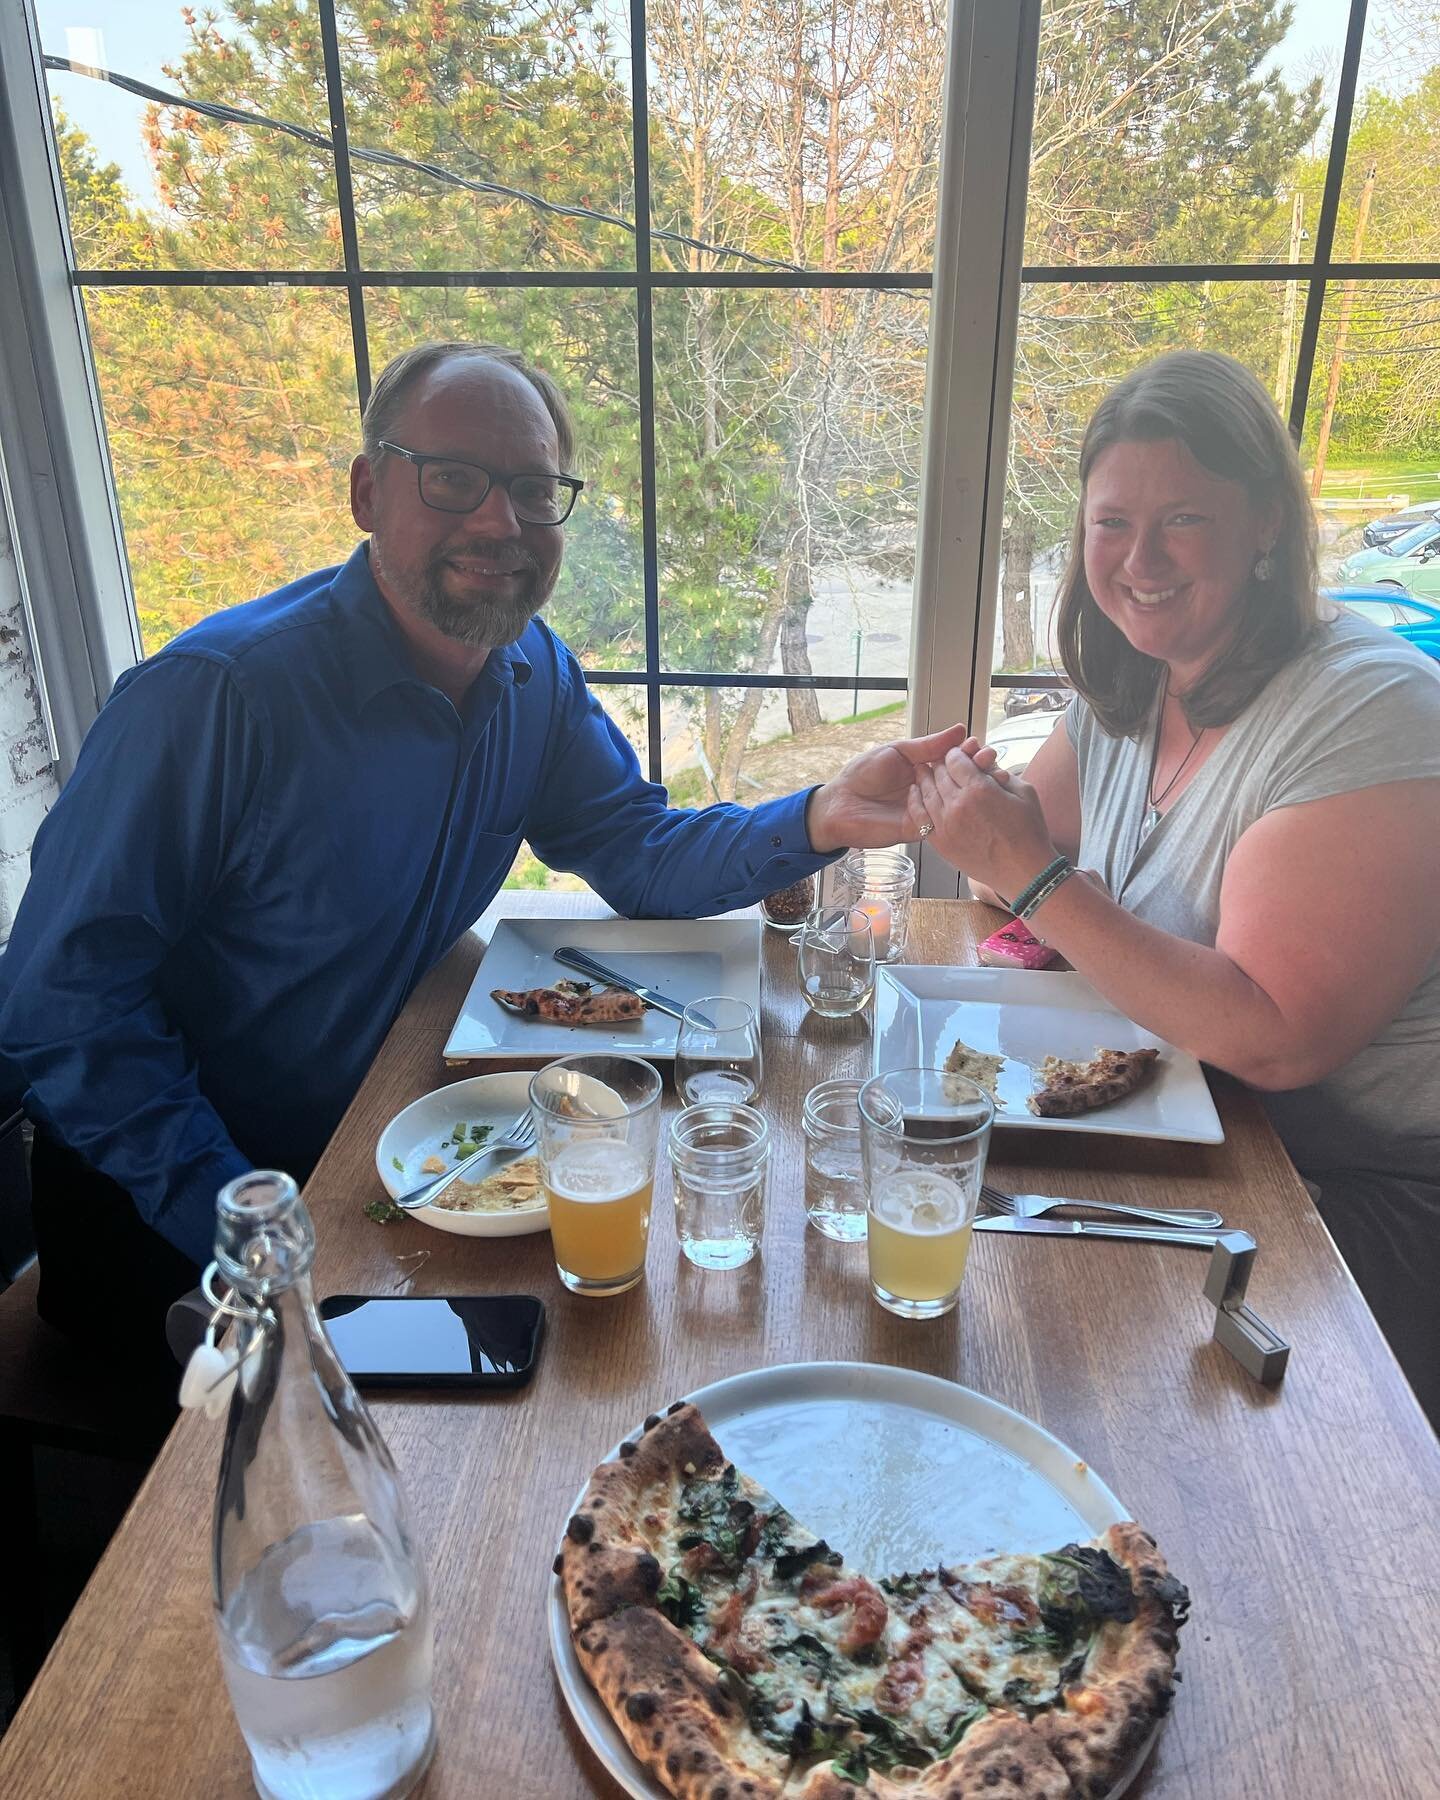 Congratulations to Bryan and Carrie on being the first proposal in our dining room! And yes&hellip;. She said yes!!

Congratulations and here&rsquo;s to many more memories!!
🍾 🍕 🔥